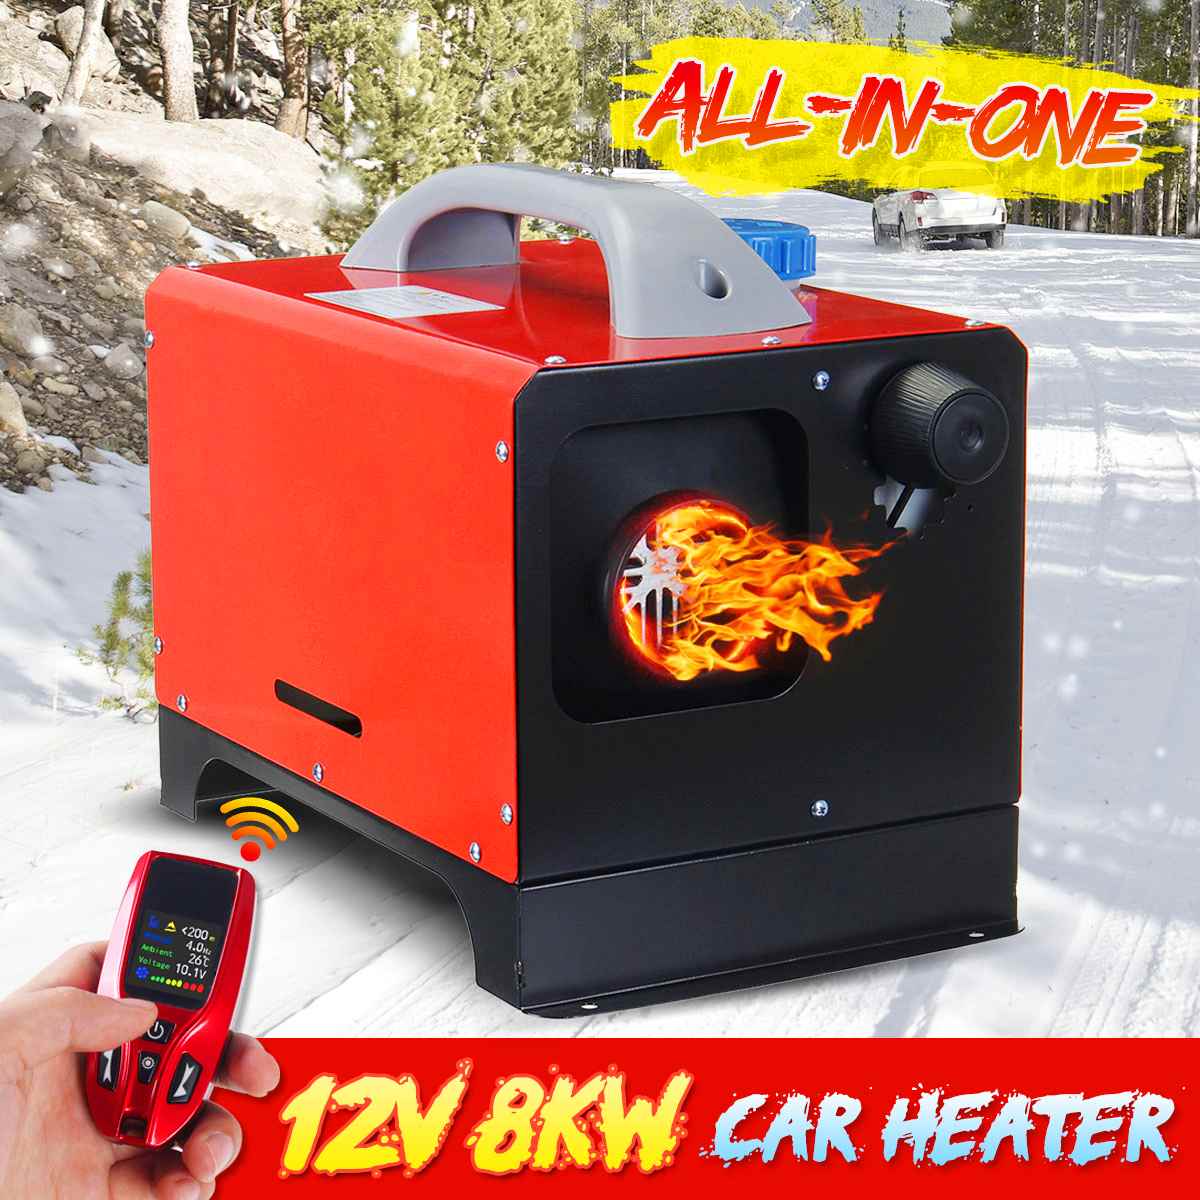 All In One 8000W Mini Diesel Air Heater 8KW 12V One Hole Car Heater For Trucks Motor-Homes LCD /Button Remote New Arrival 2019